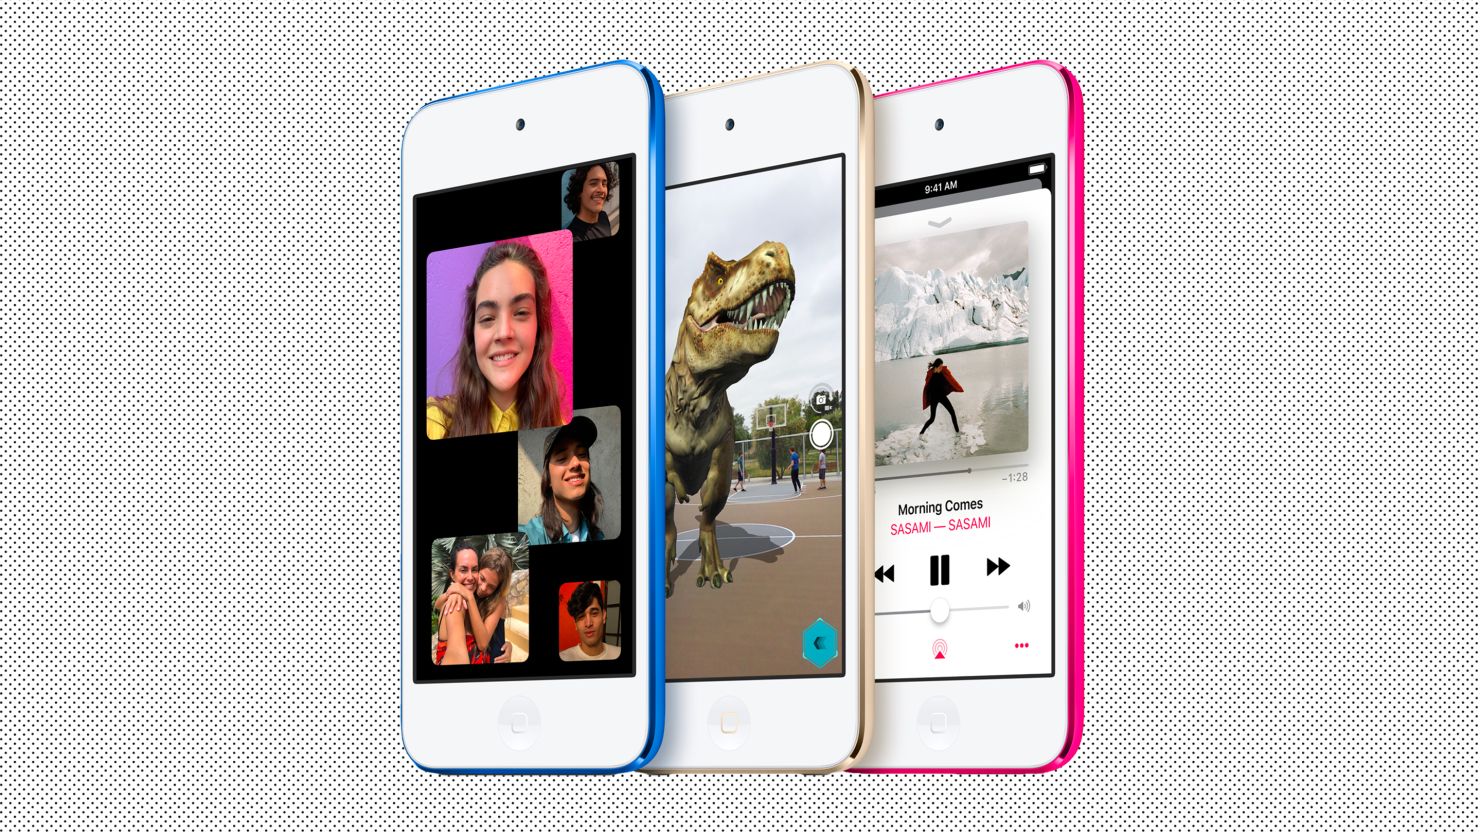 Apple's 7th Generation iPod Touch is available now for $199